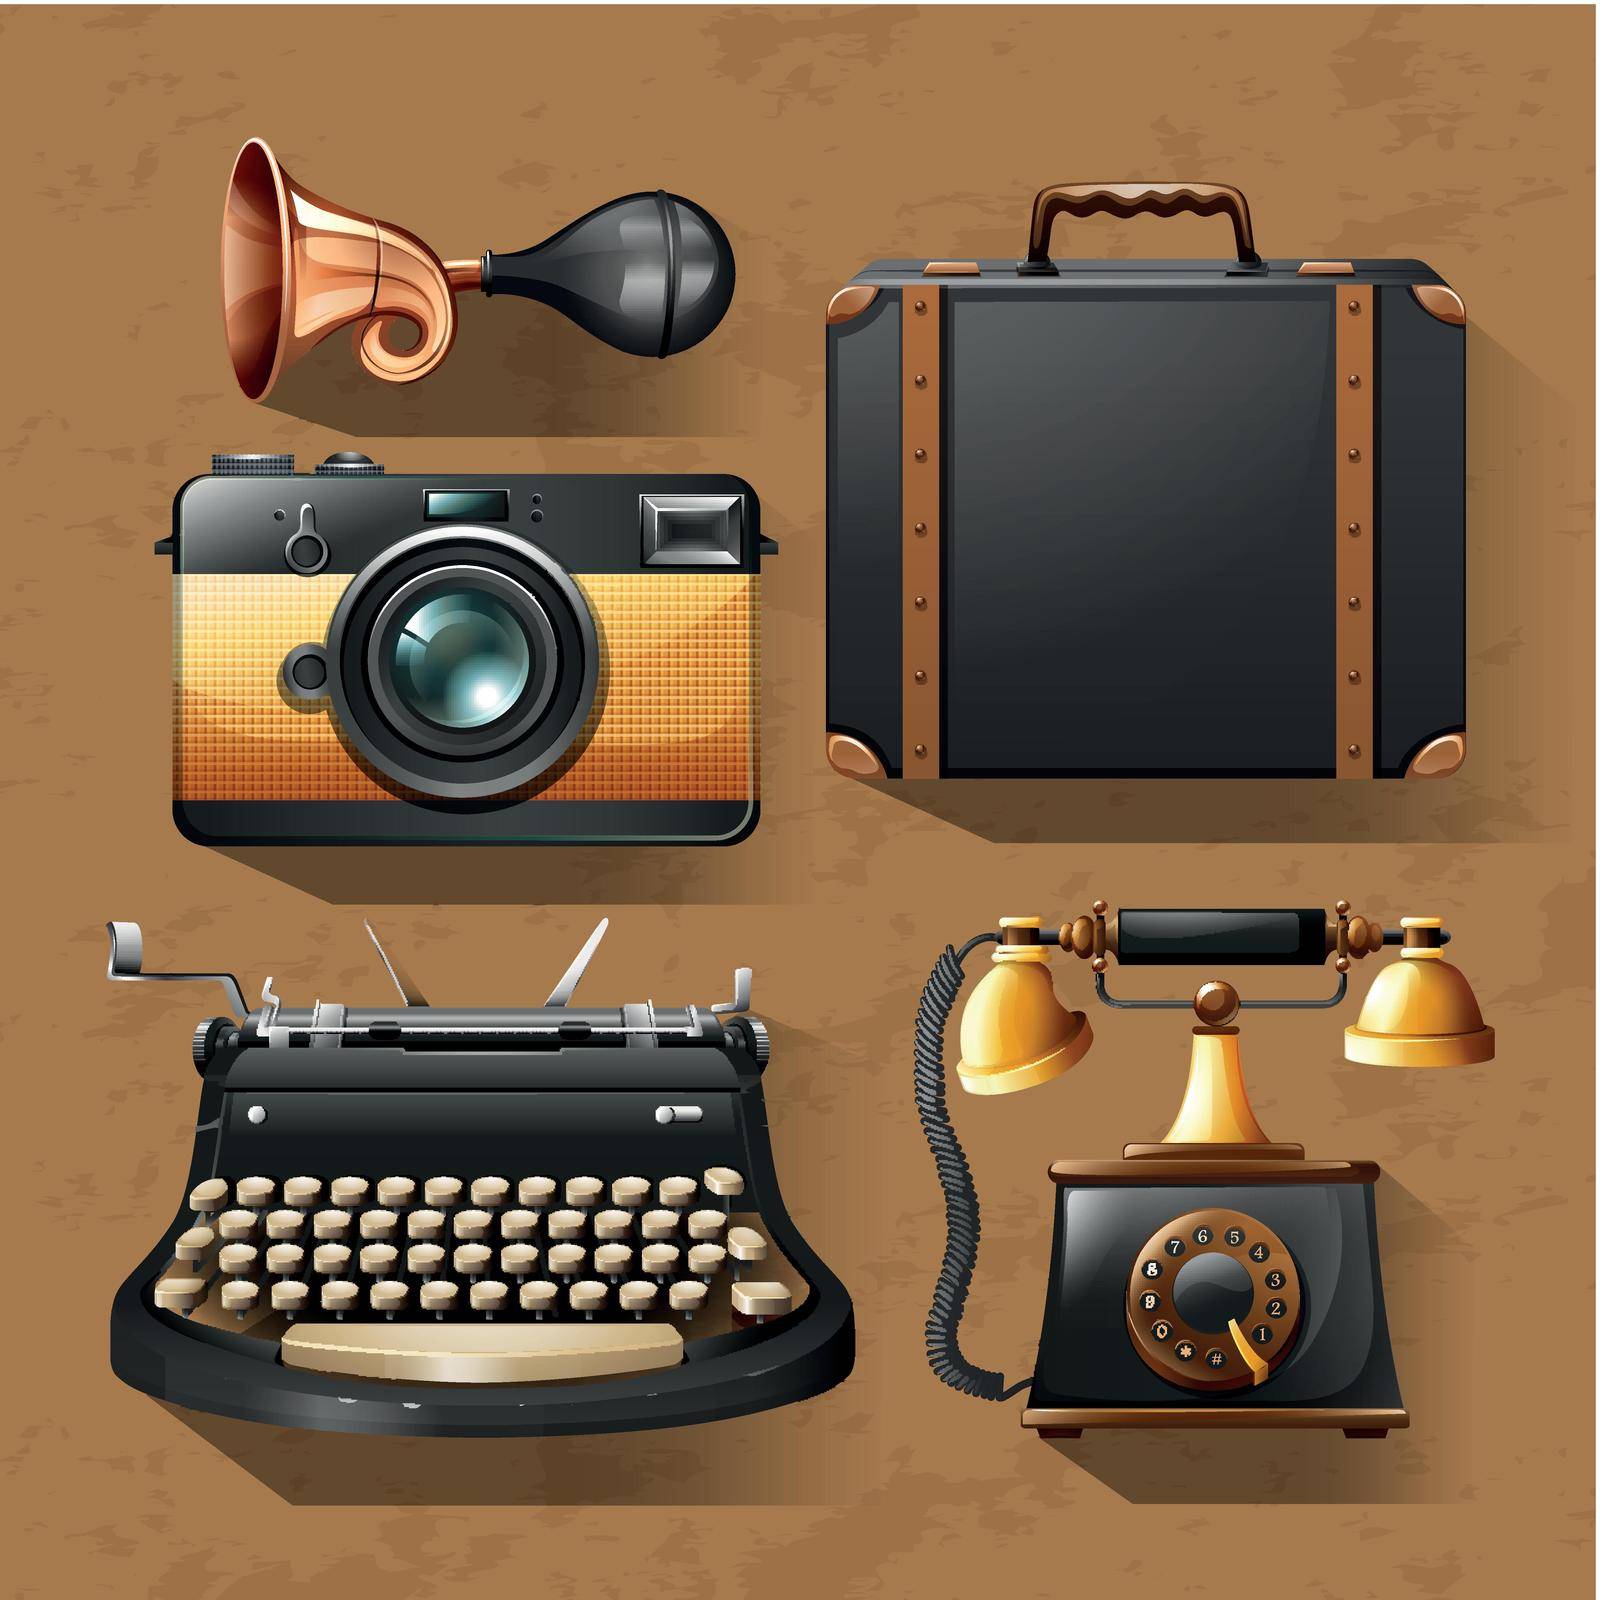 Camera and other items in vintage style illustration